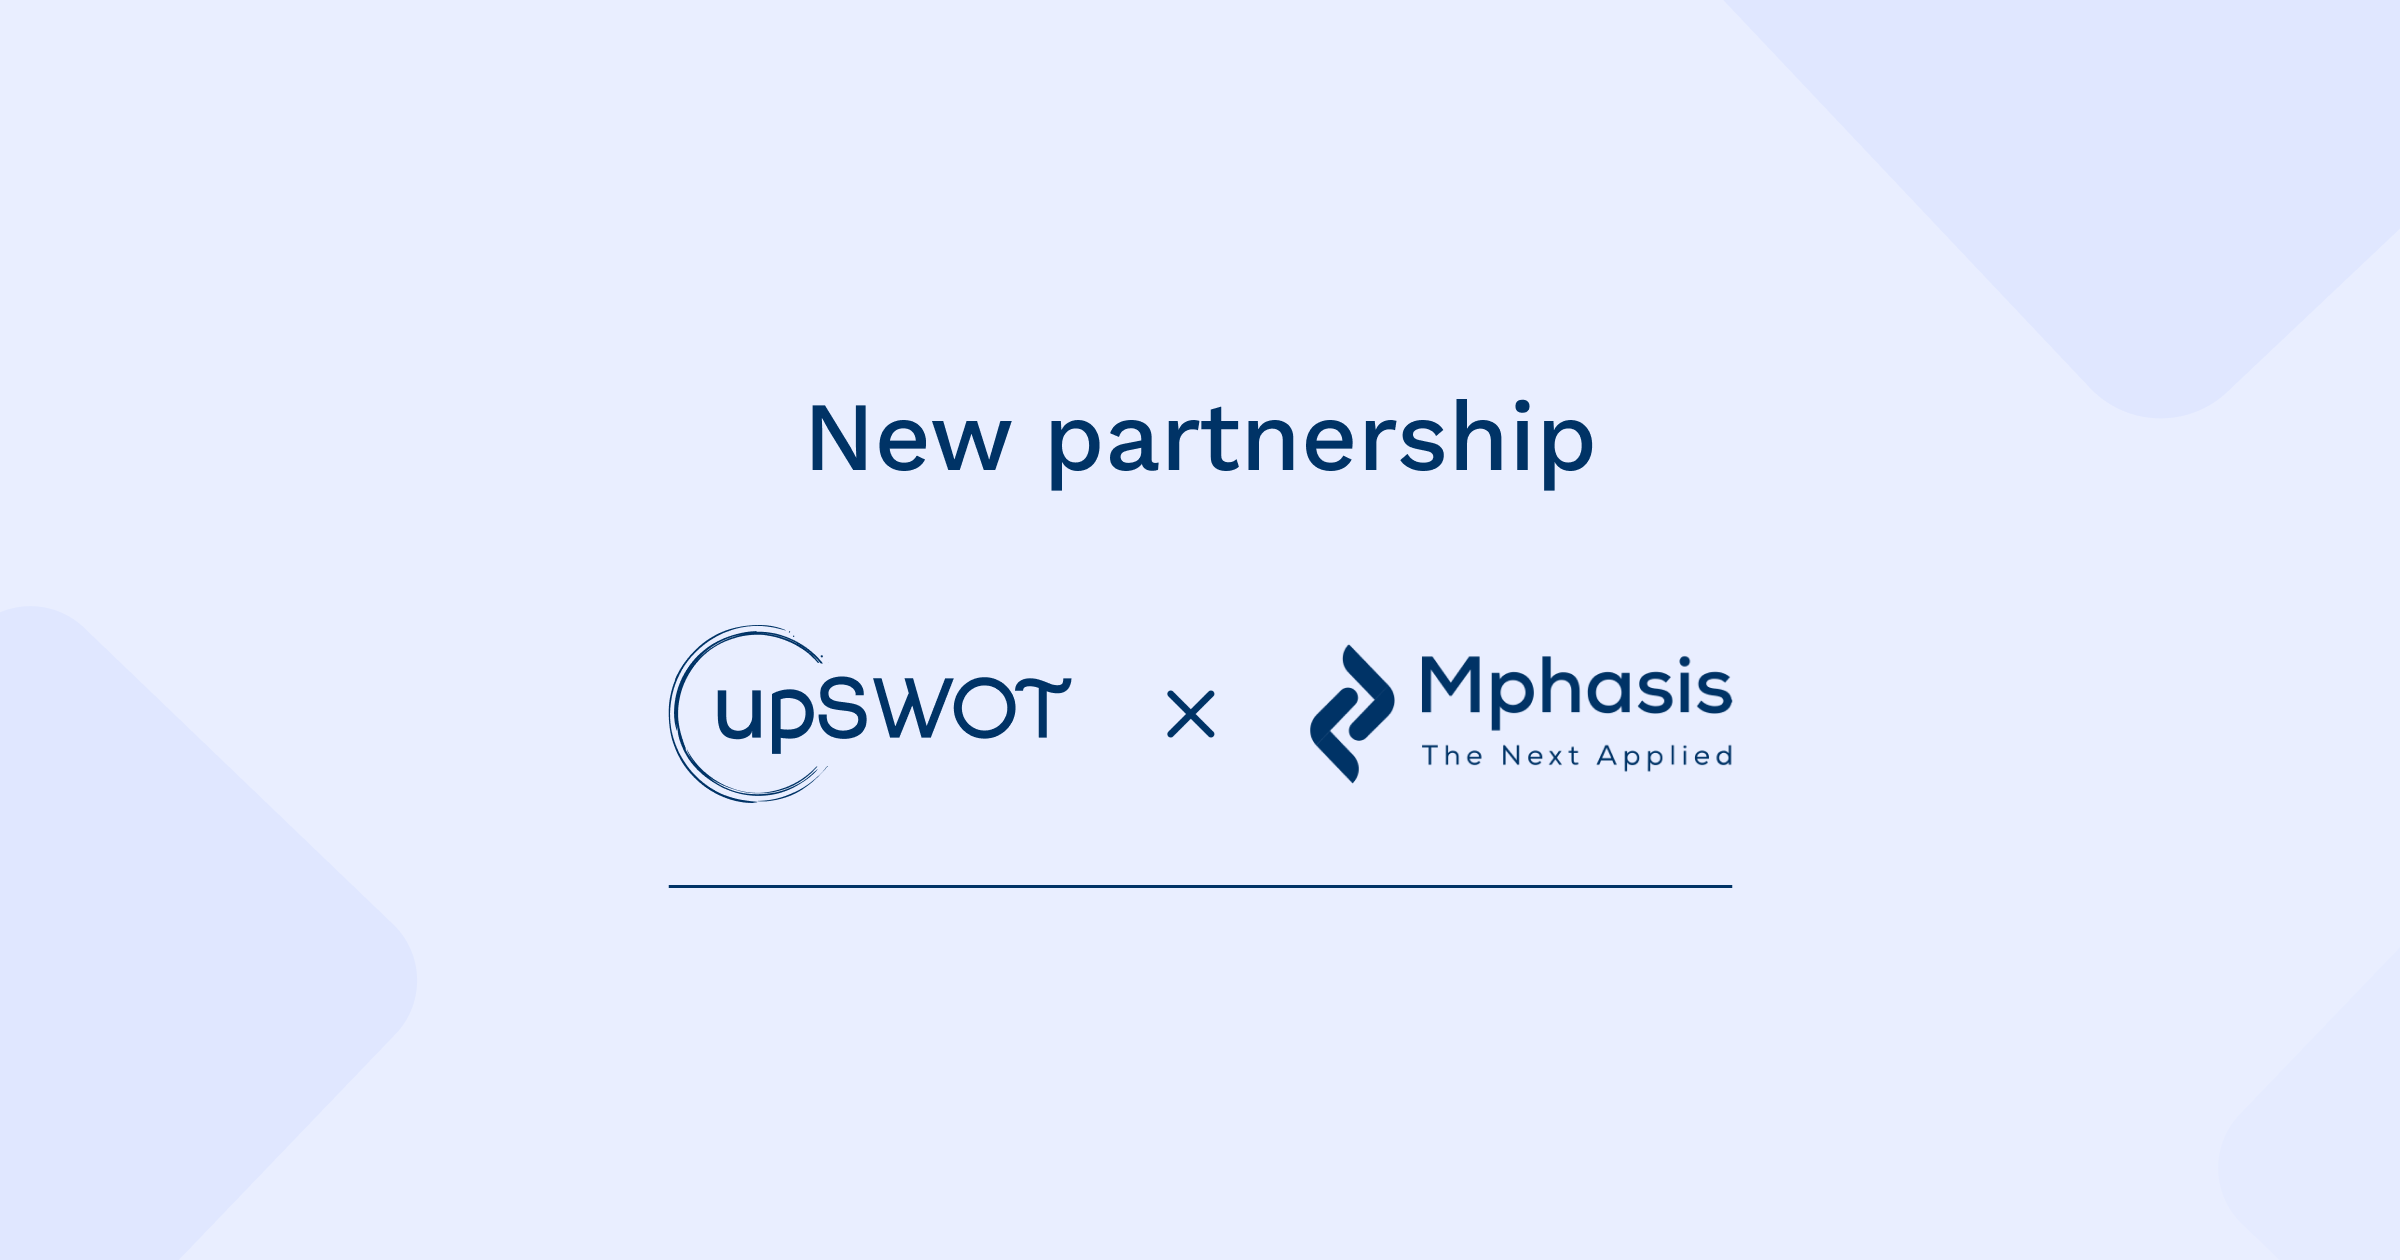 Mphasis Partners with upSWOT to Offer Marketing Insights Through Alternative Data for Business Banking